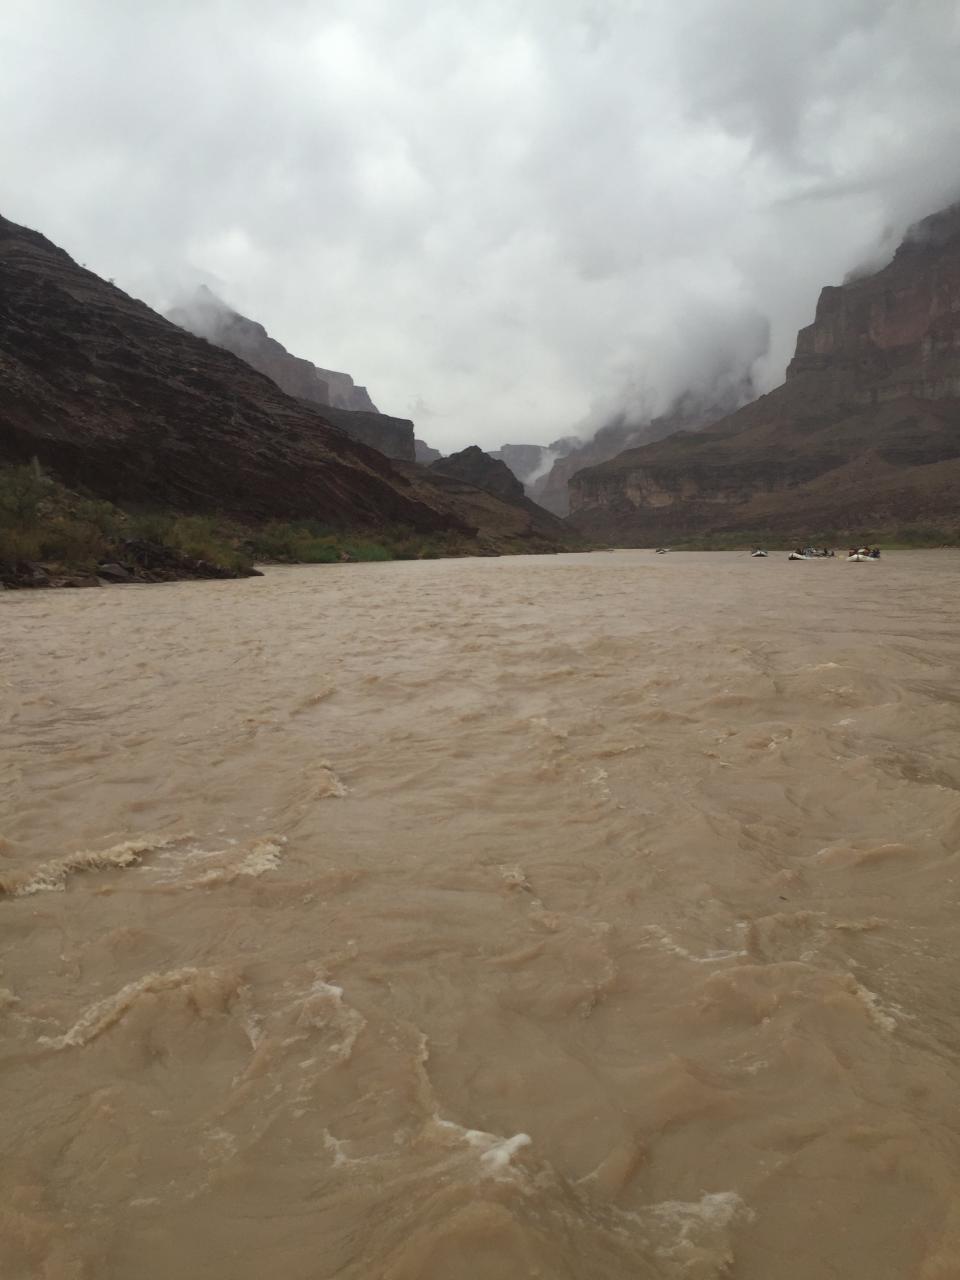 The Colorado River meanders through the Grand Canyon on a cold, rainy day.